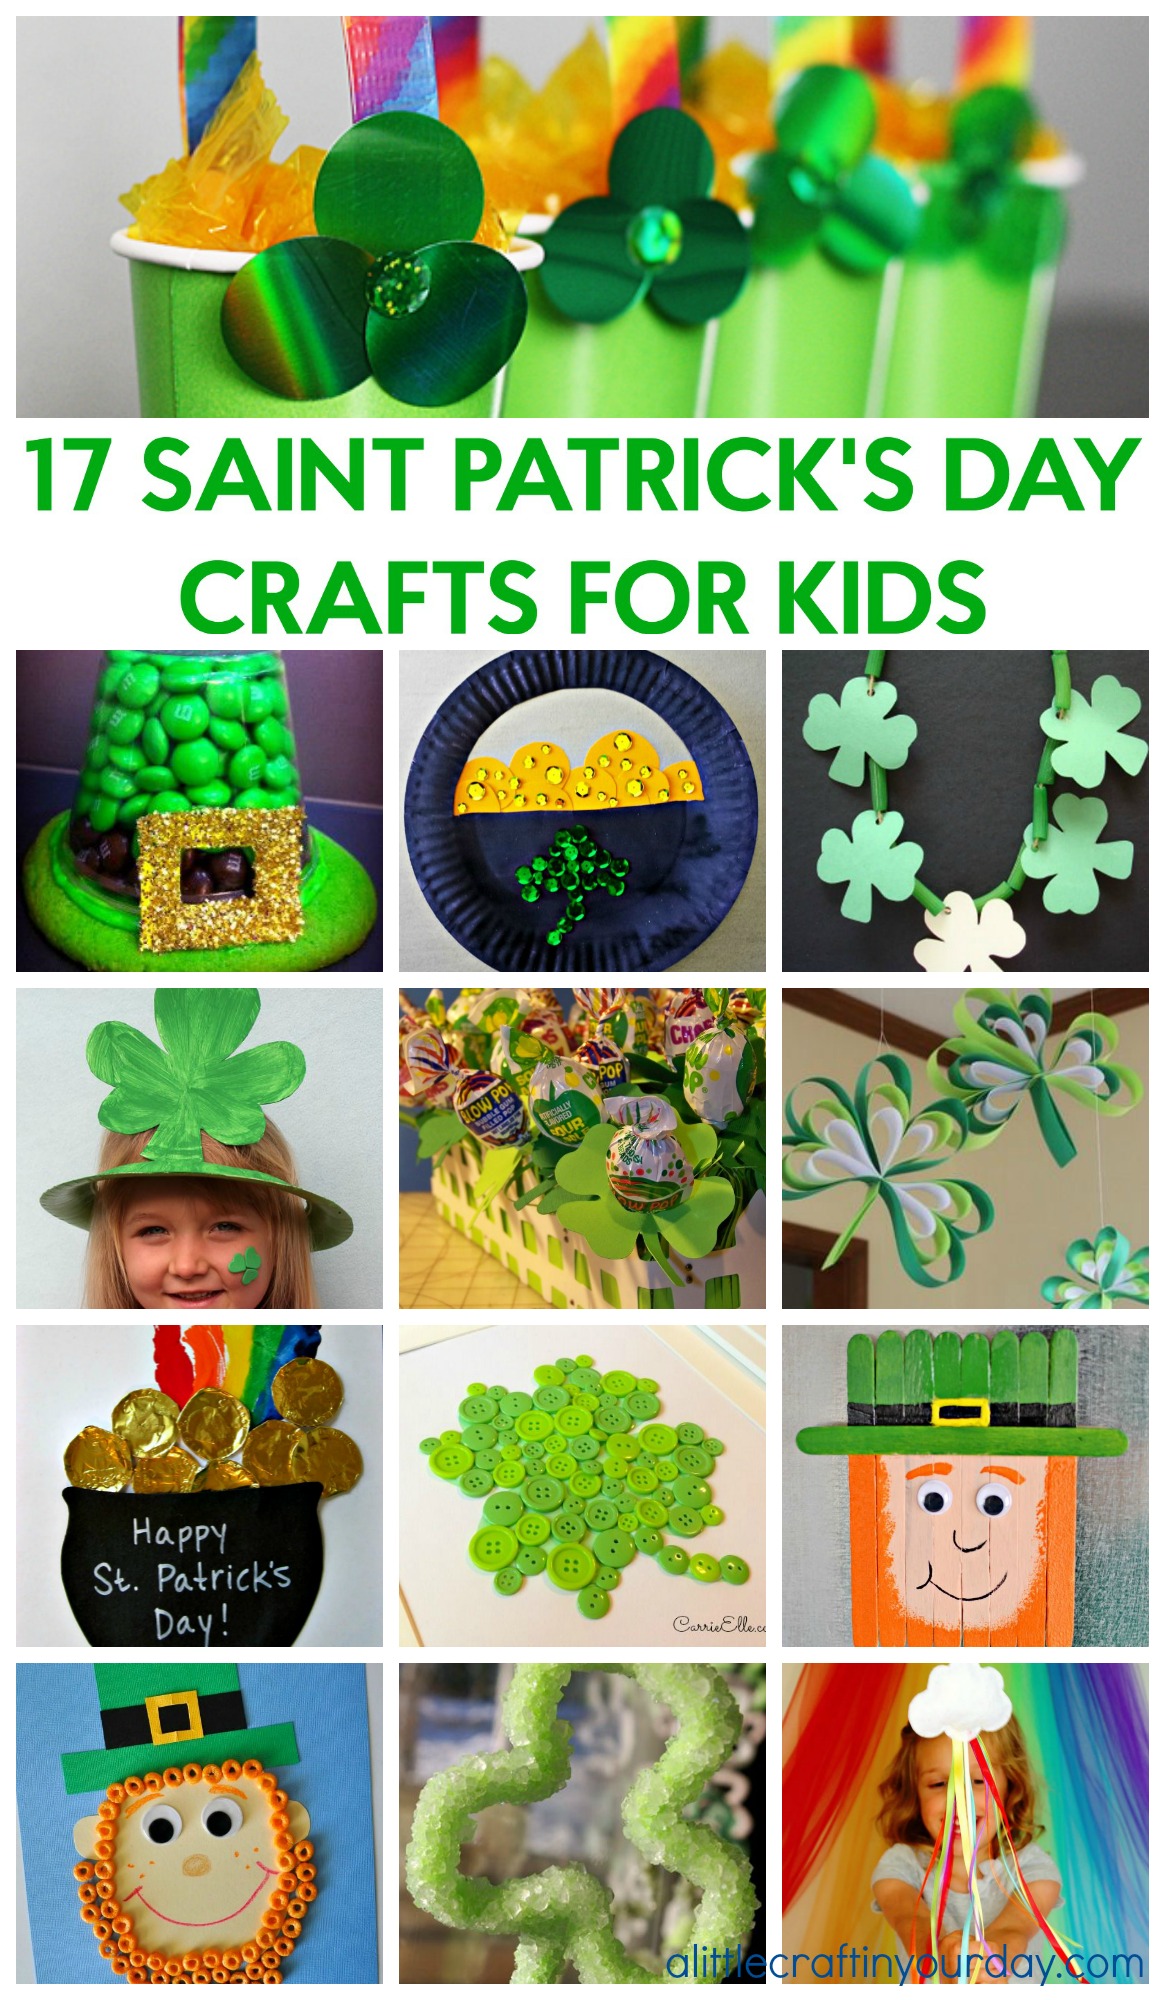 17-saint-patrick-s-day-crafts-for-kids-a-little-craft-in-your-day